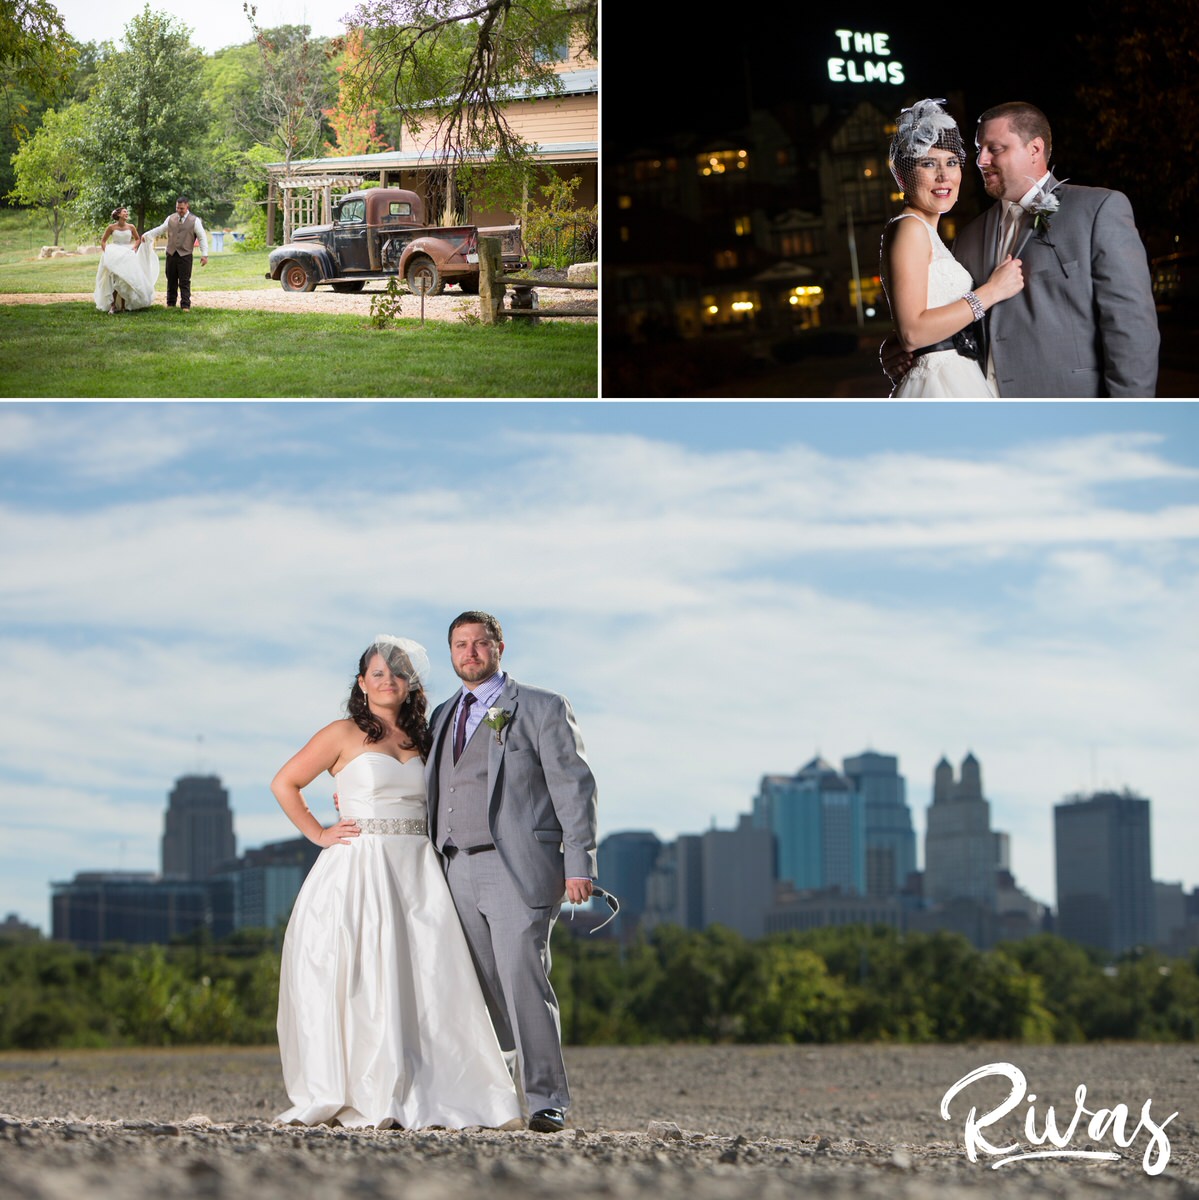 10 Years | A grouping of three photos of three different brides and grooms on their wedding days in the Kansas City area. 